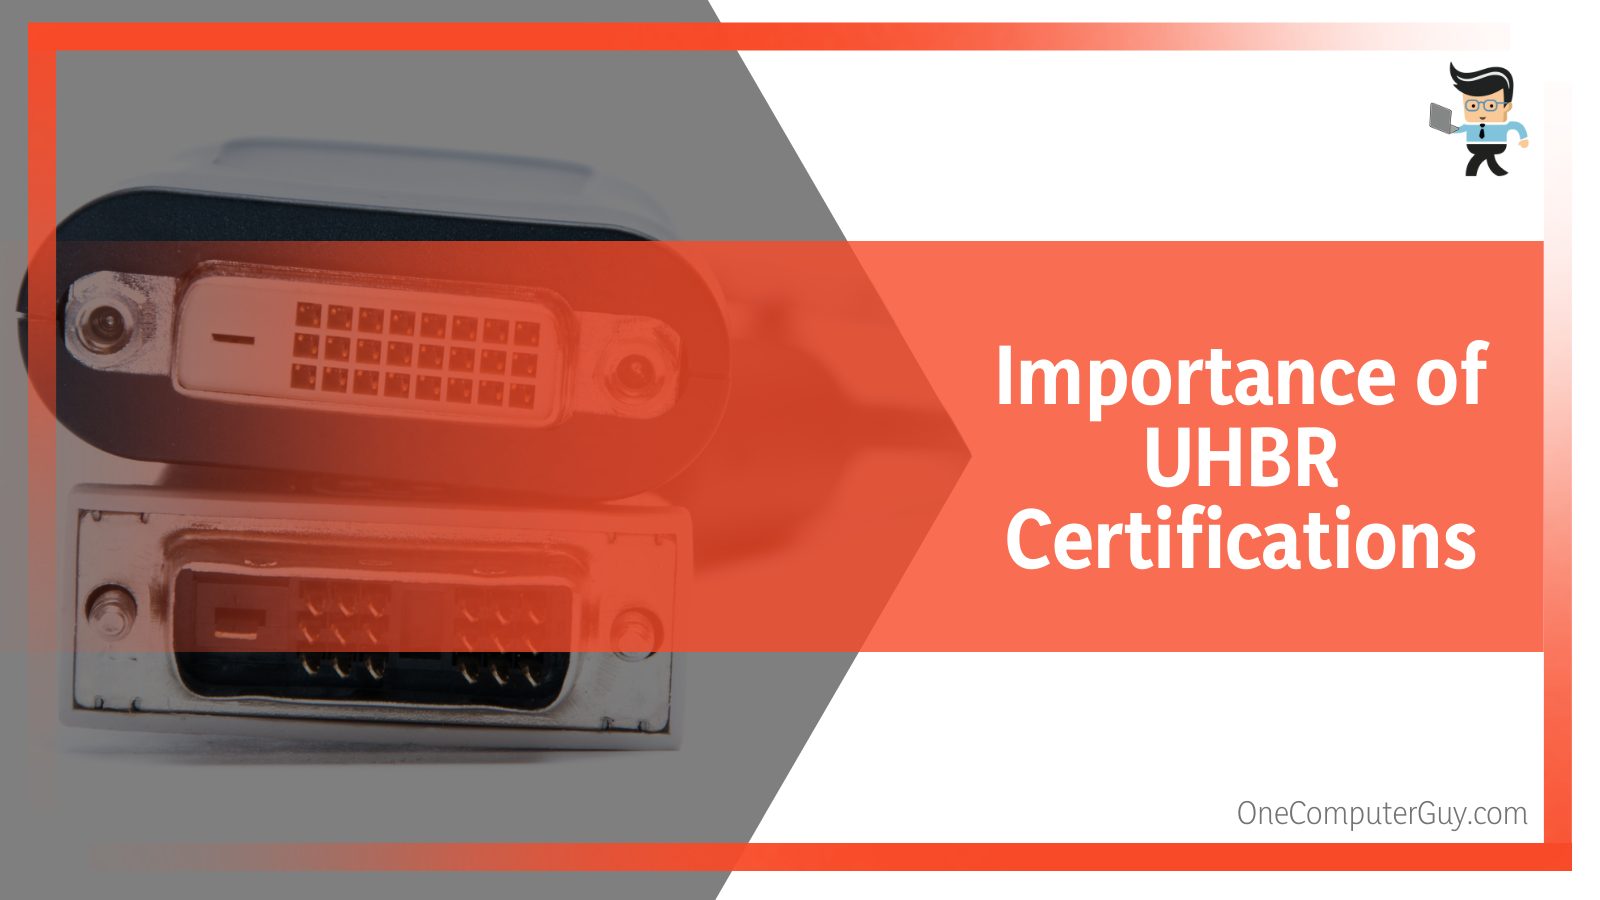 Importance of UHBR Certifications